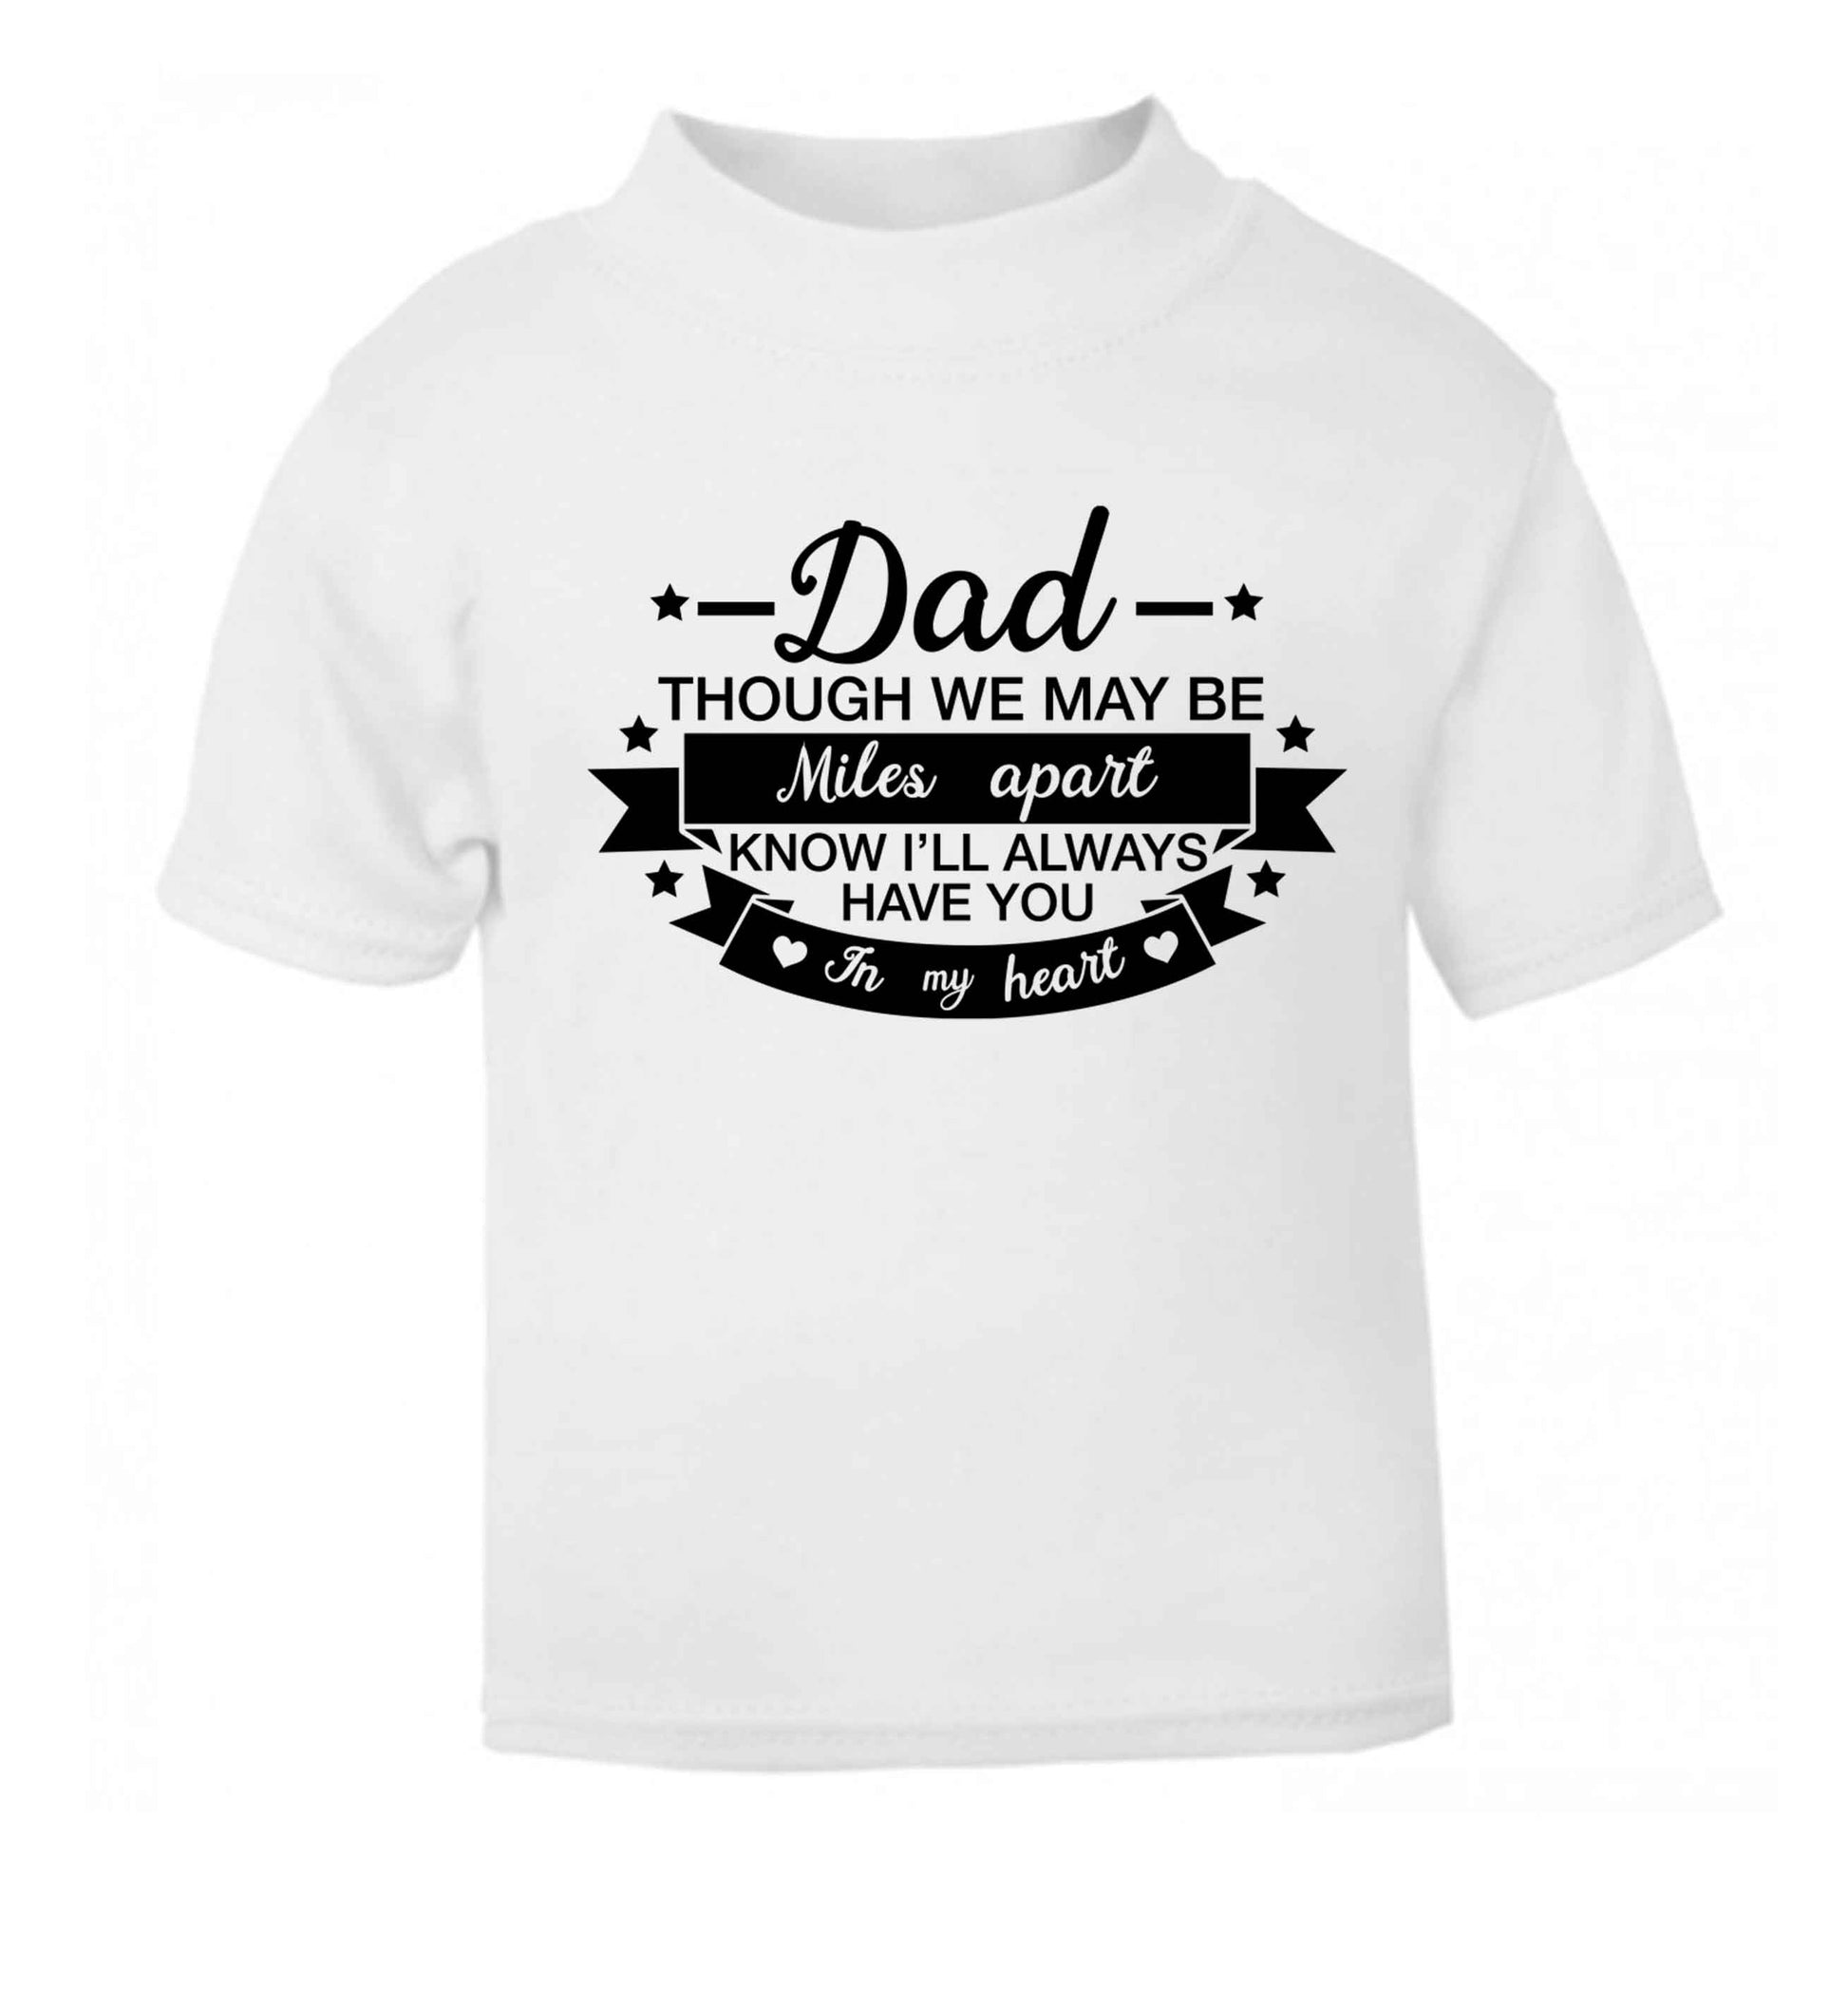 Dad though we are miles apart know I'll always have you in my heart white baby toddler Tshirt 2 Years